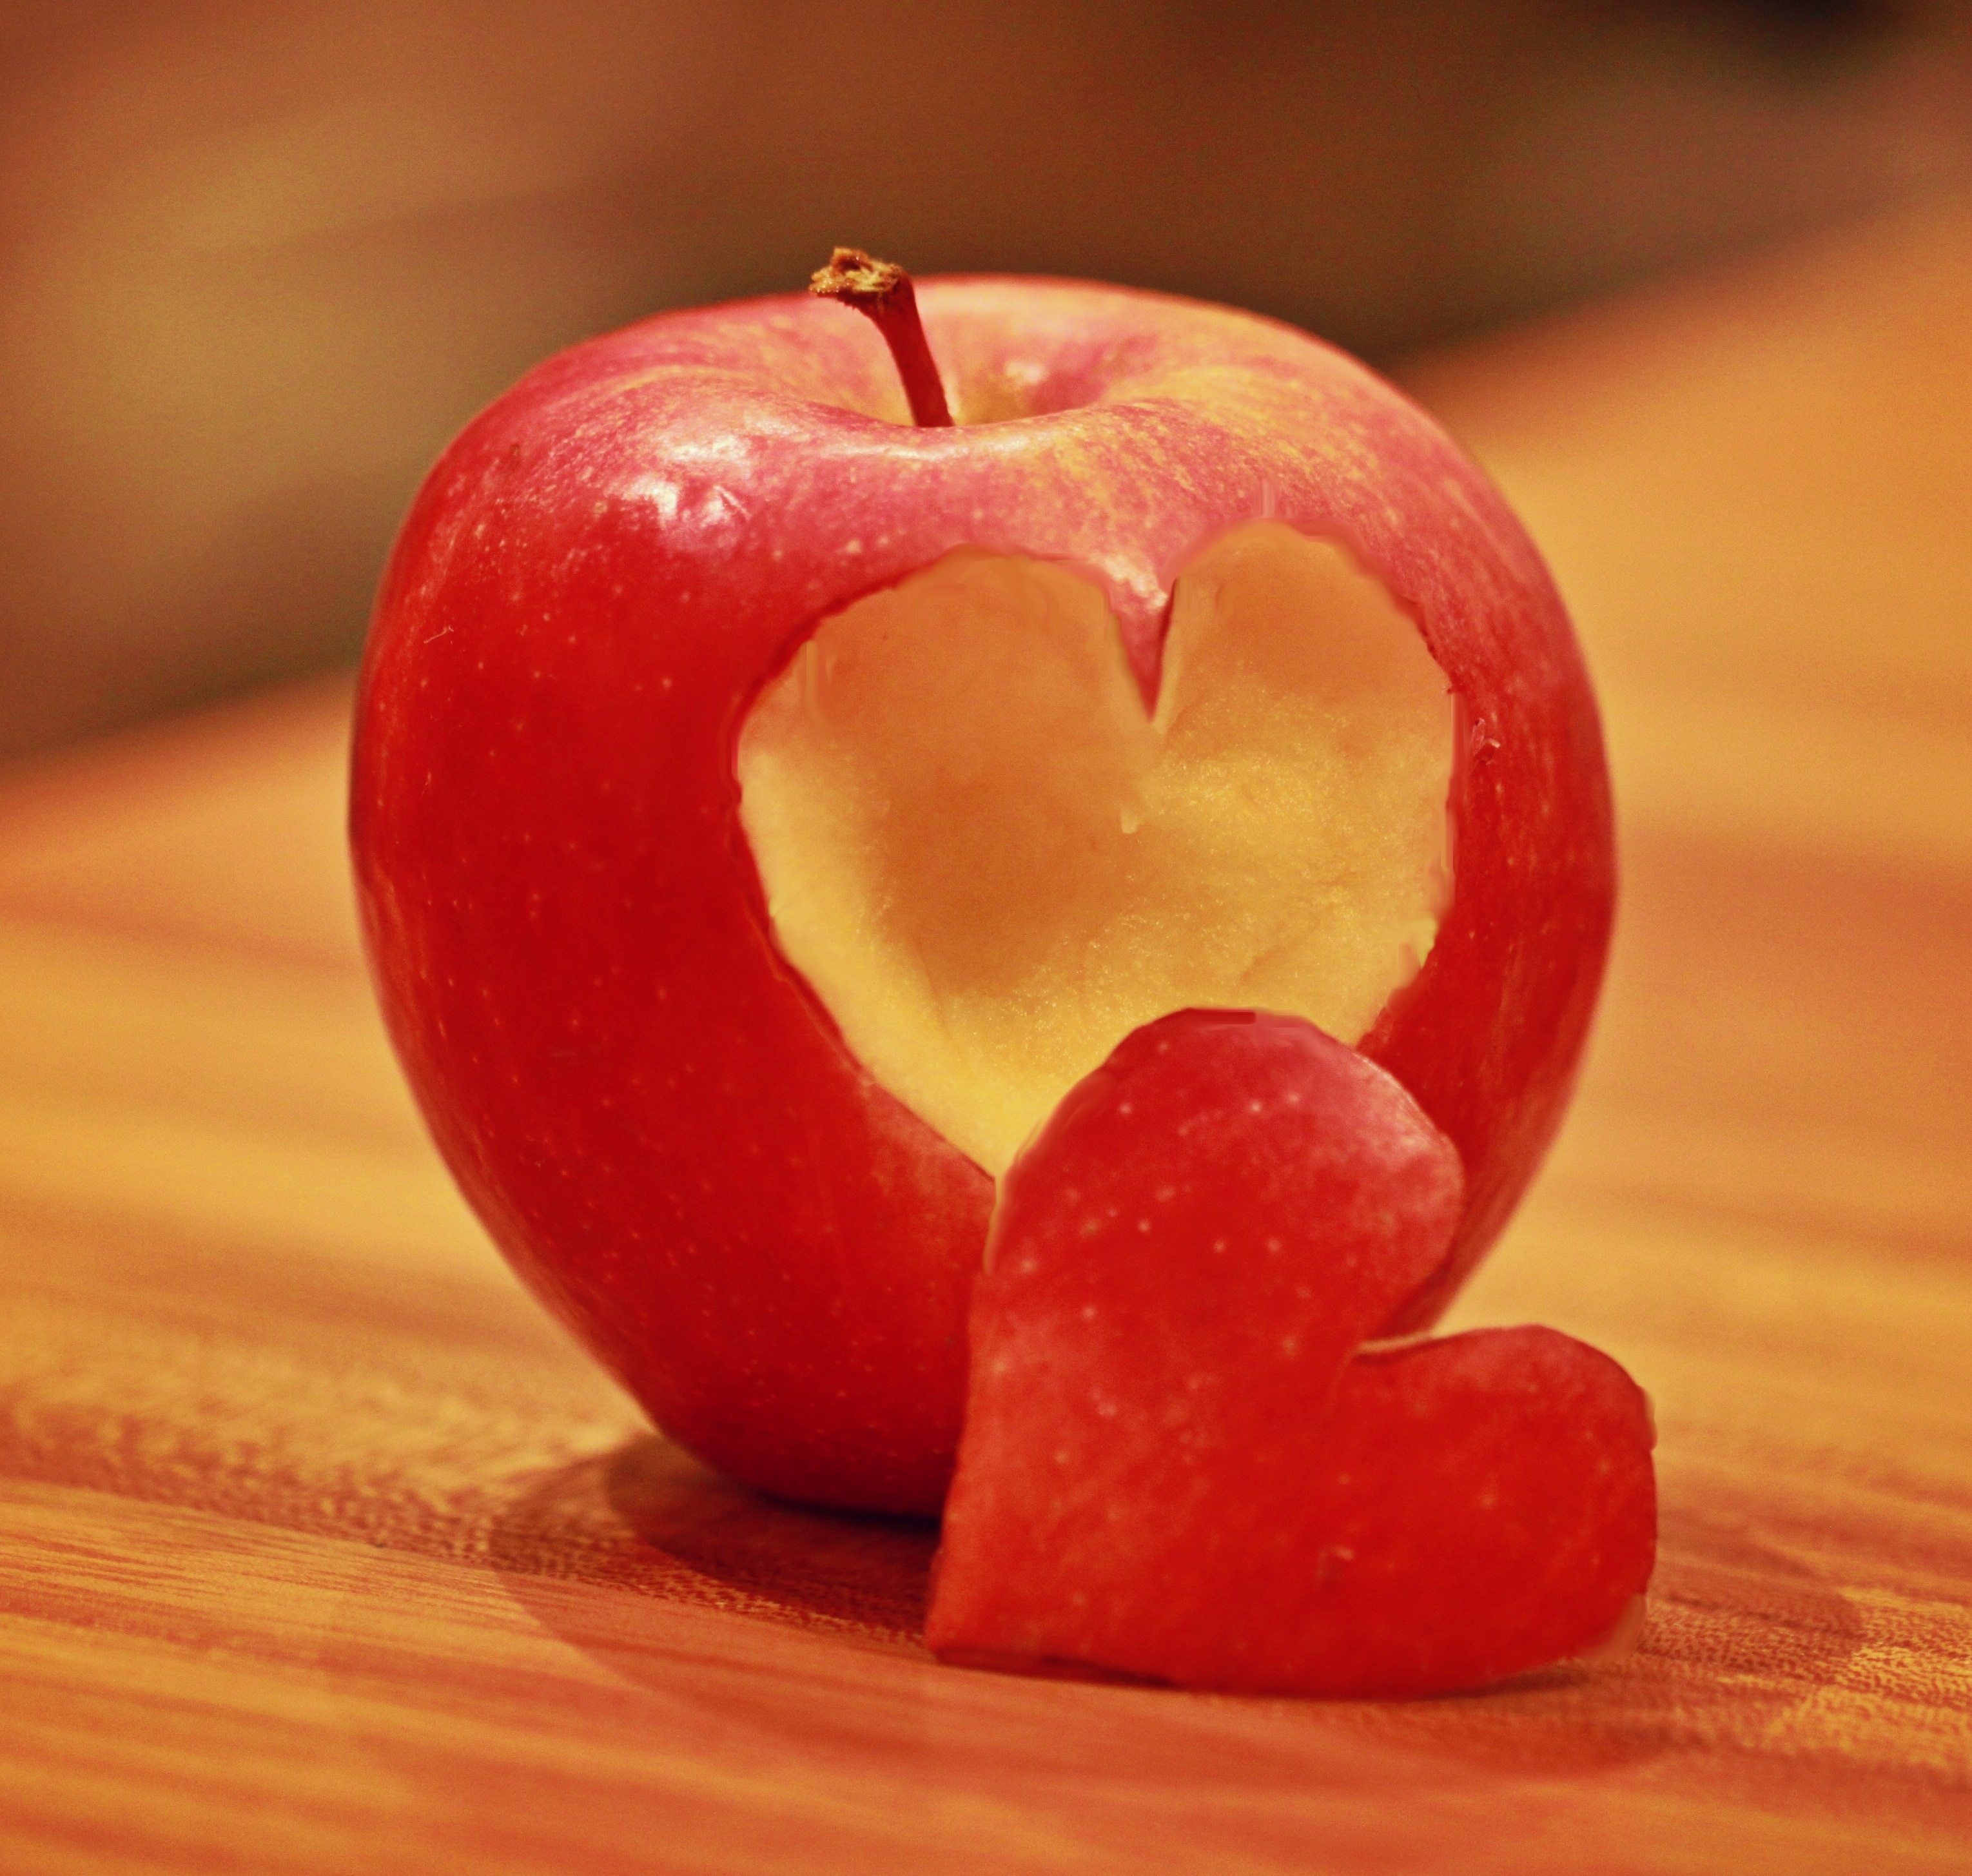 Red, Love, Apple, Healthy, Fruit, Heart, fruit, food and drink